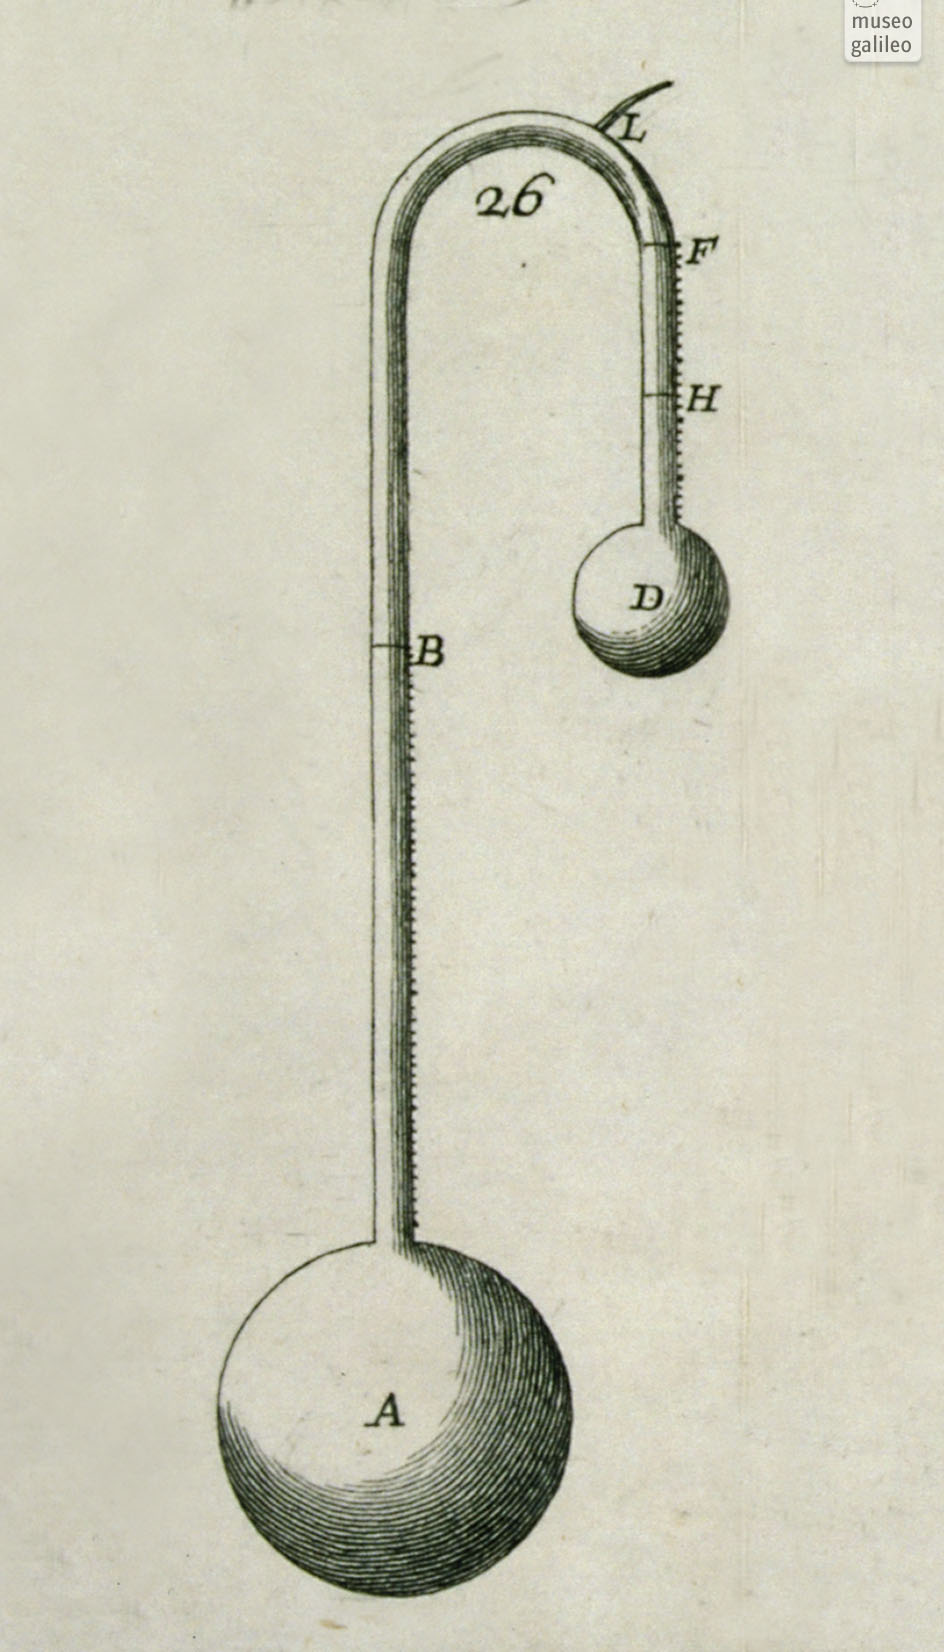 Differential thermometers